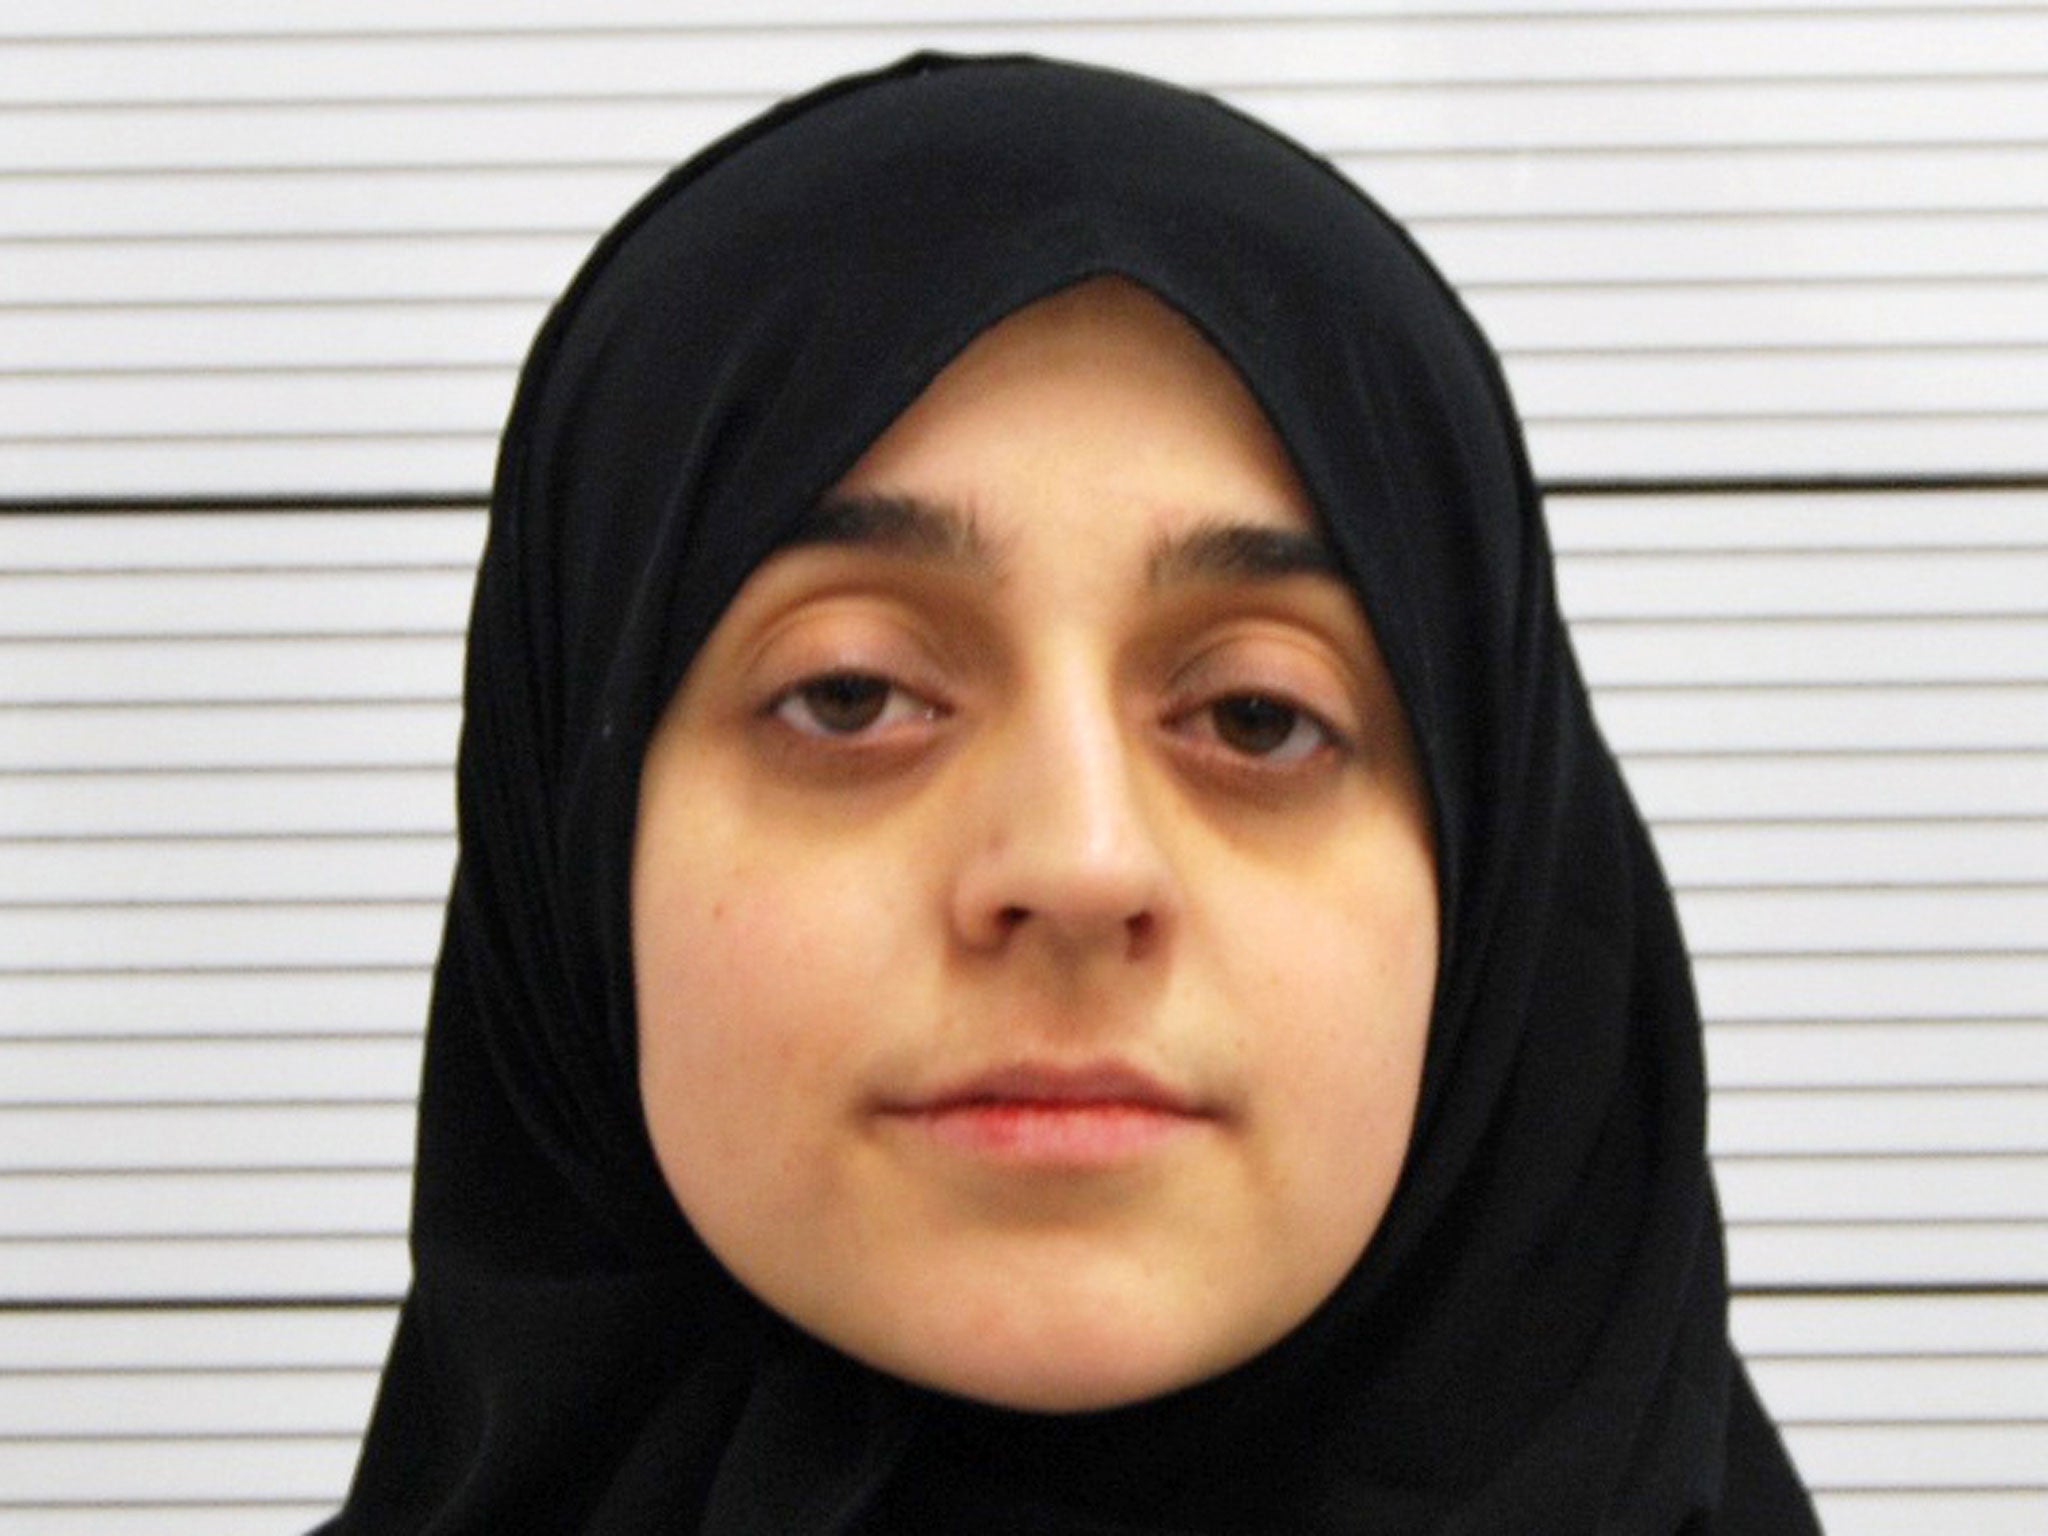 Tareena Shakil fled to the self-declared caliphate after telling her family she was off on holiday to Turkey